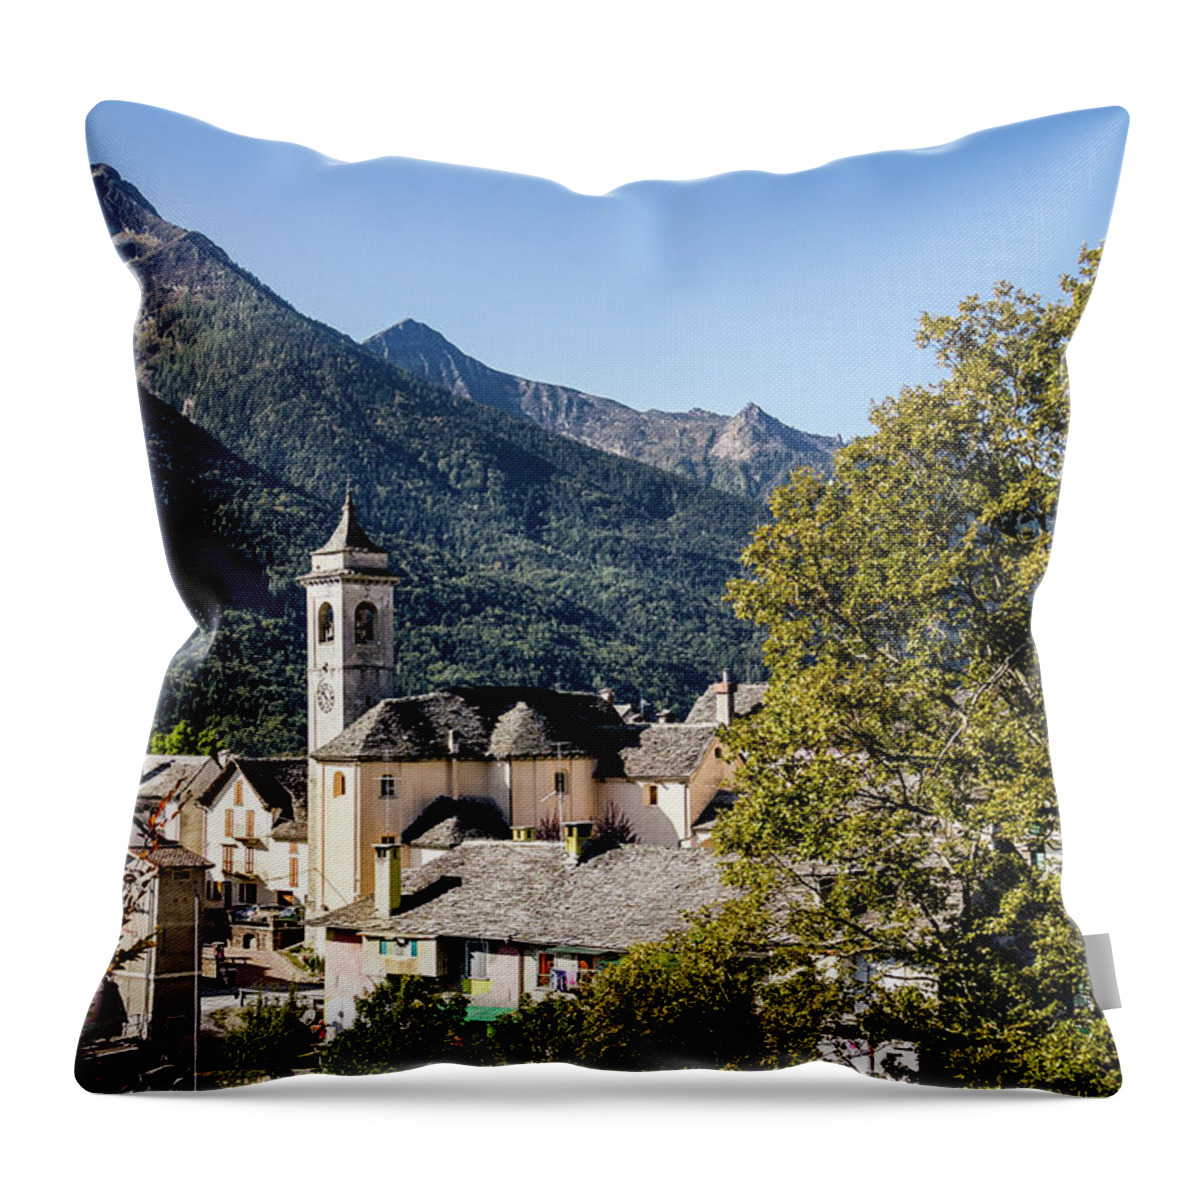 Italy Throw Pillow featuring the photograph Italian Alpine Village by Craig A Walker